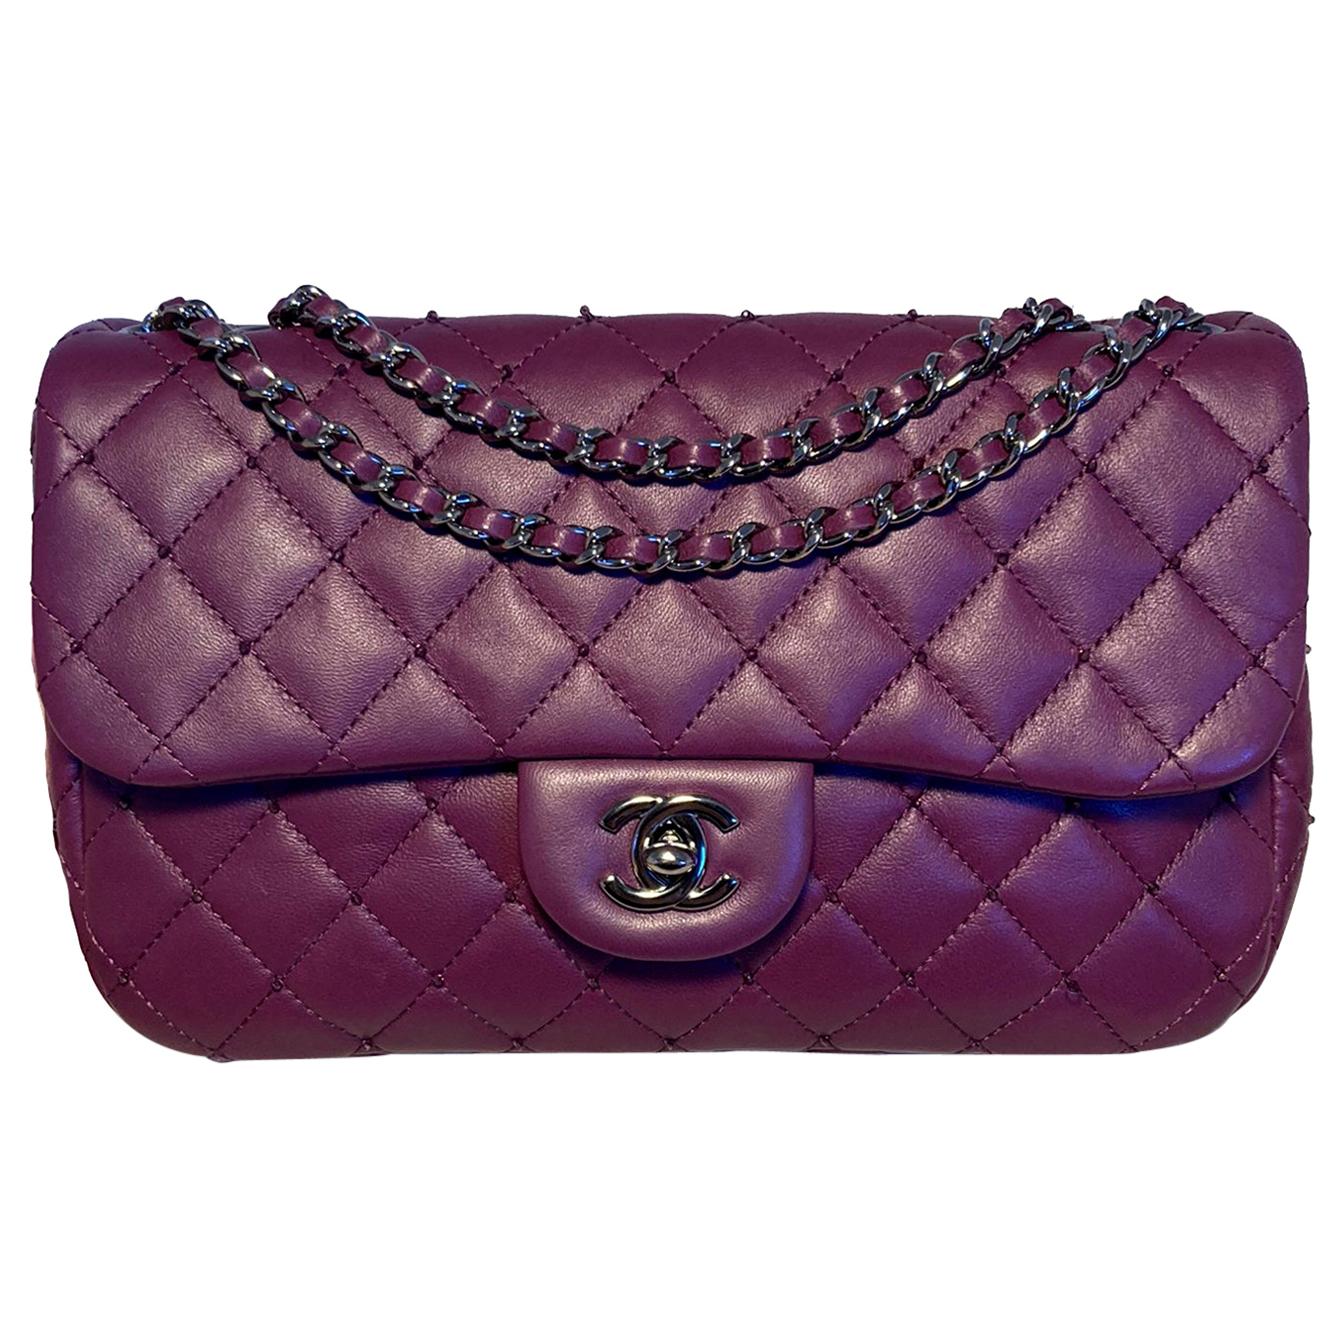 Chanel Purple Beaded Leather Classic Flap Shoulder Bag